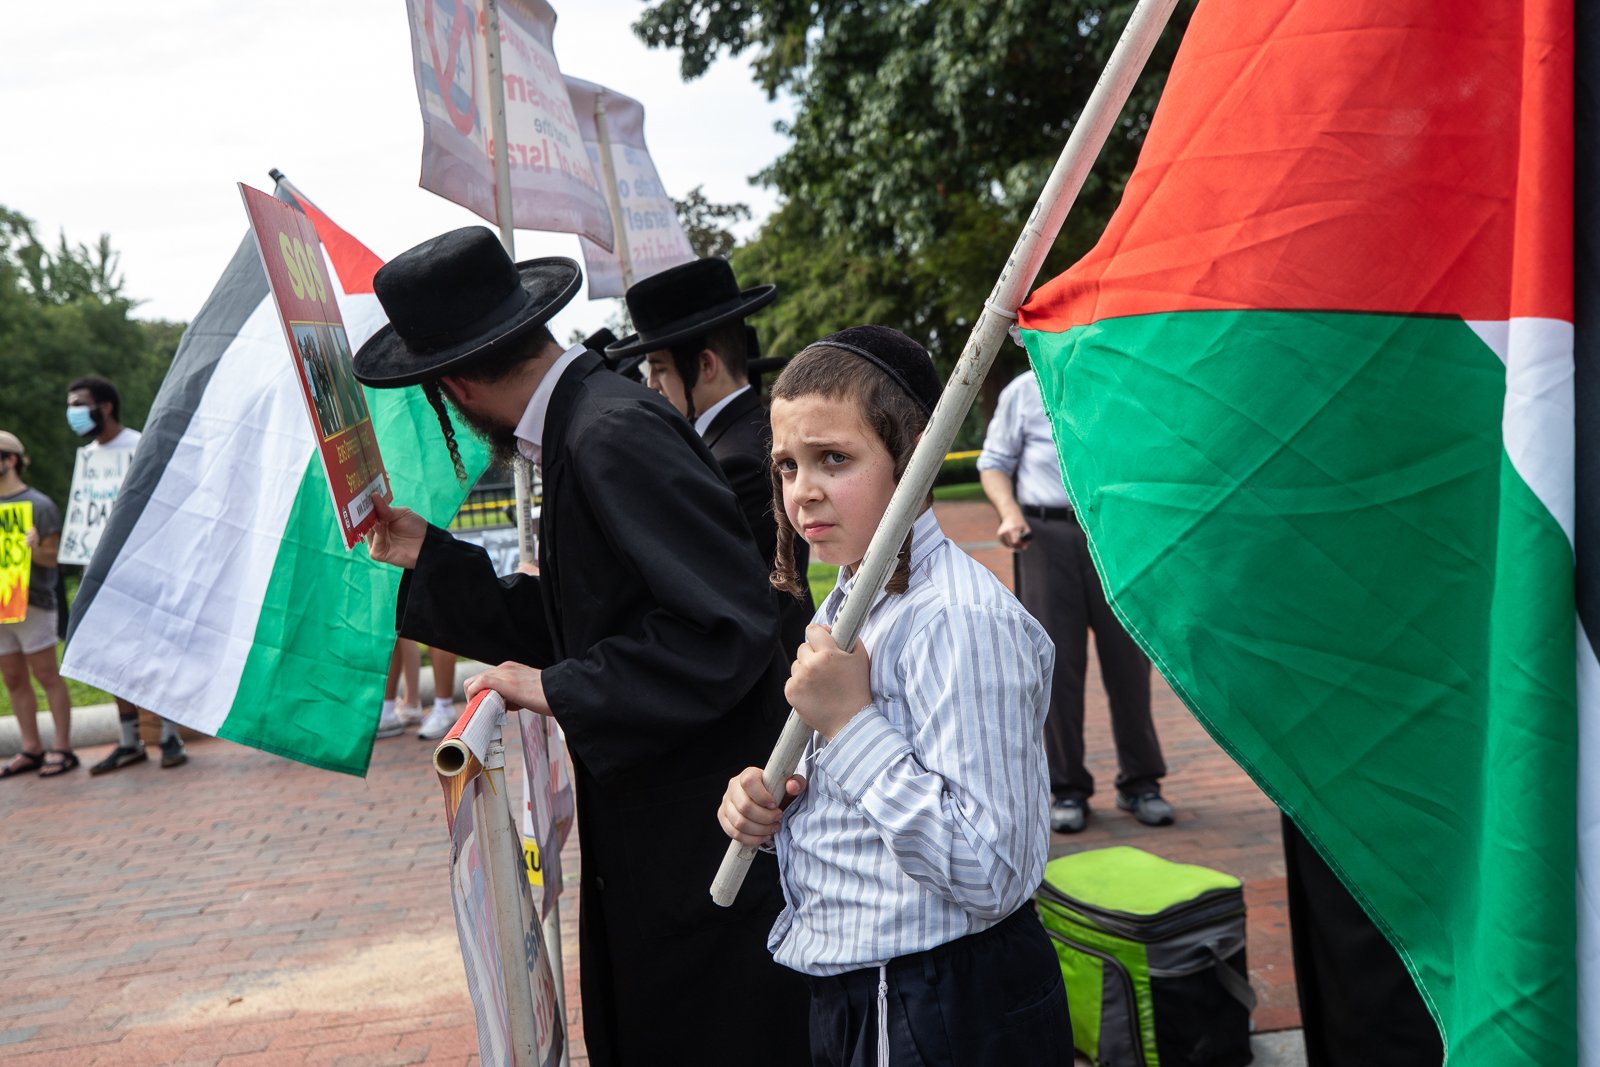 A group of rabbis joined demonstrators in protest of President Joe Biden's meeting with Israeli Prime Minister Naftali Bennett in Washington, D.C. on August 26, 2021. (Kaylee Greenlee - Daily Caller News Foundation)